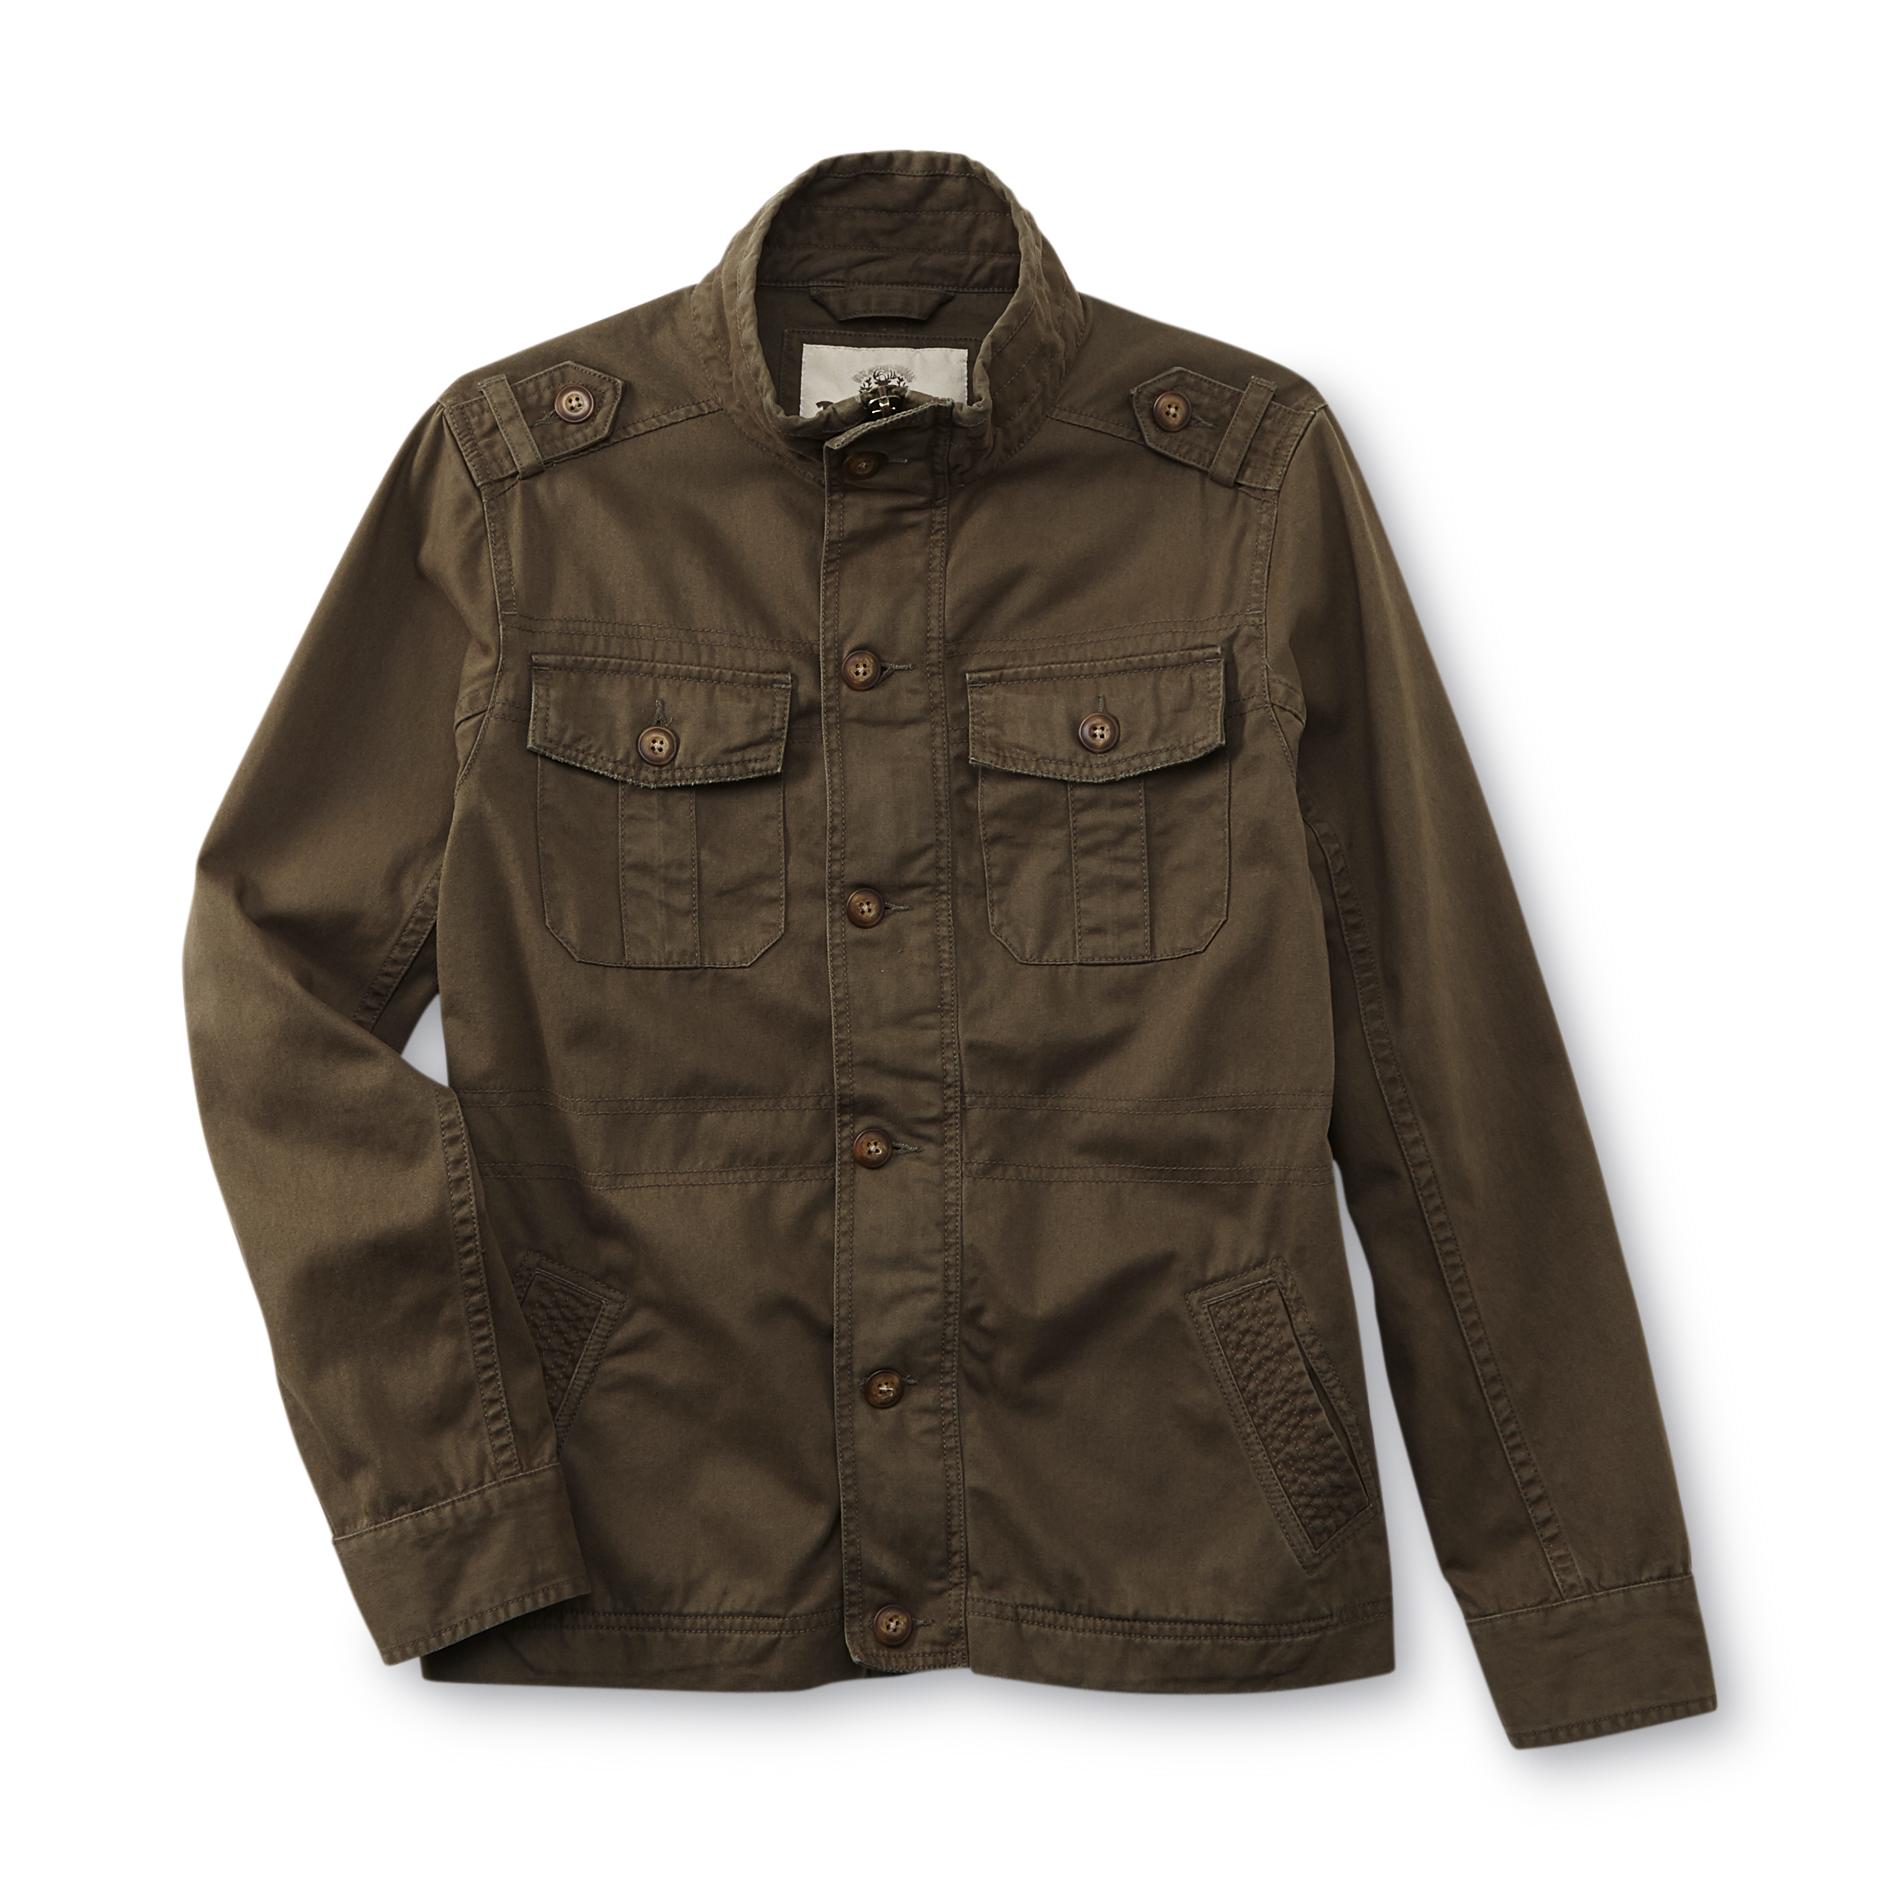 Roebuck & Co. Young Men's Military Jacket